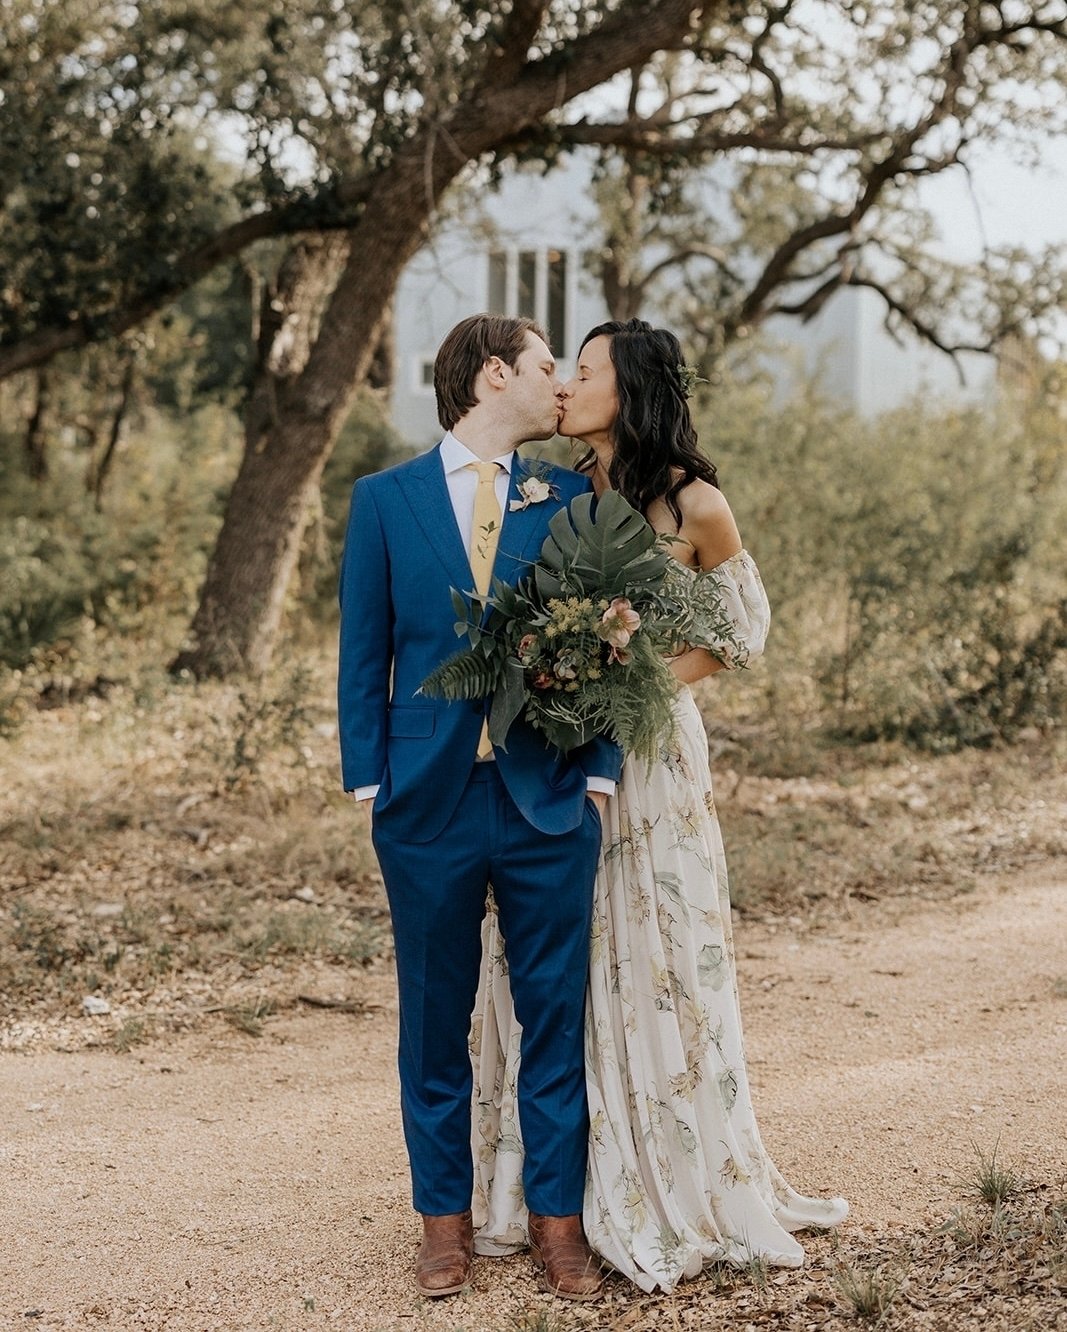 Today&rsquo;s agenda: love, laughter, and a happily ever after 💍✨

Hair + Makeup by LUX artist - @laurengarciamakeup
Venue - @prospecthousetx
Planner - @trulytogethereventco
Photographer -  @johndavidweddings
Florist - @sixpencefloral
Bridal Gown - 